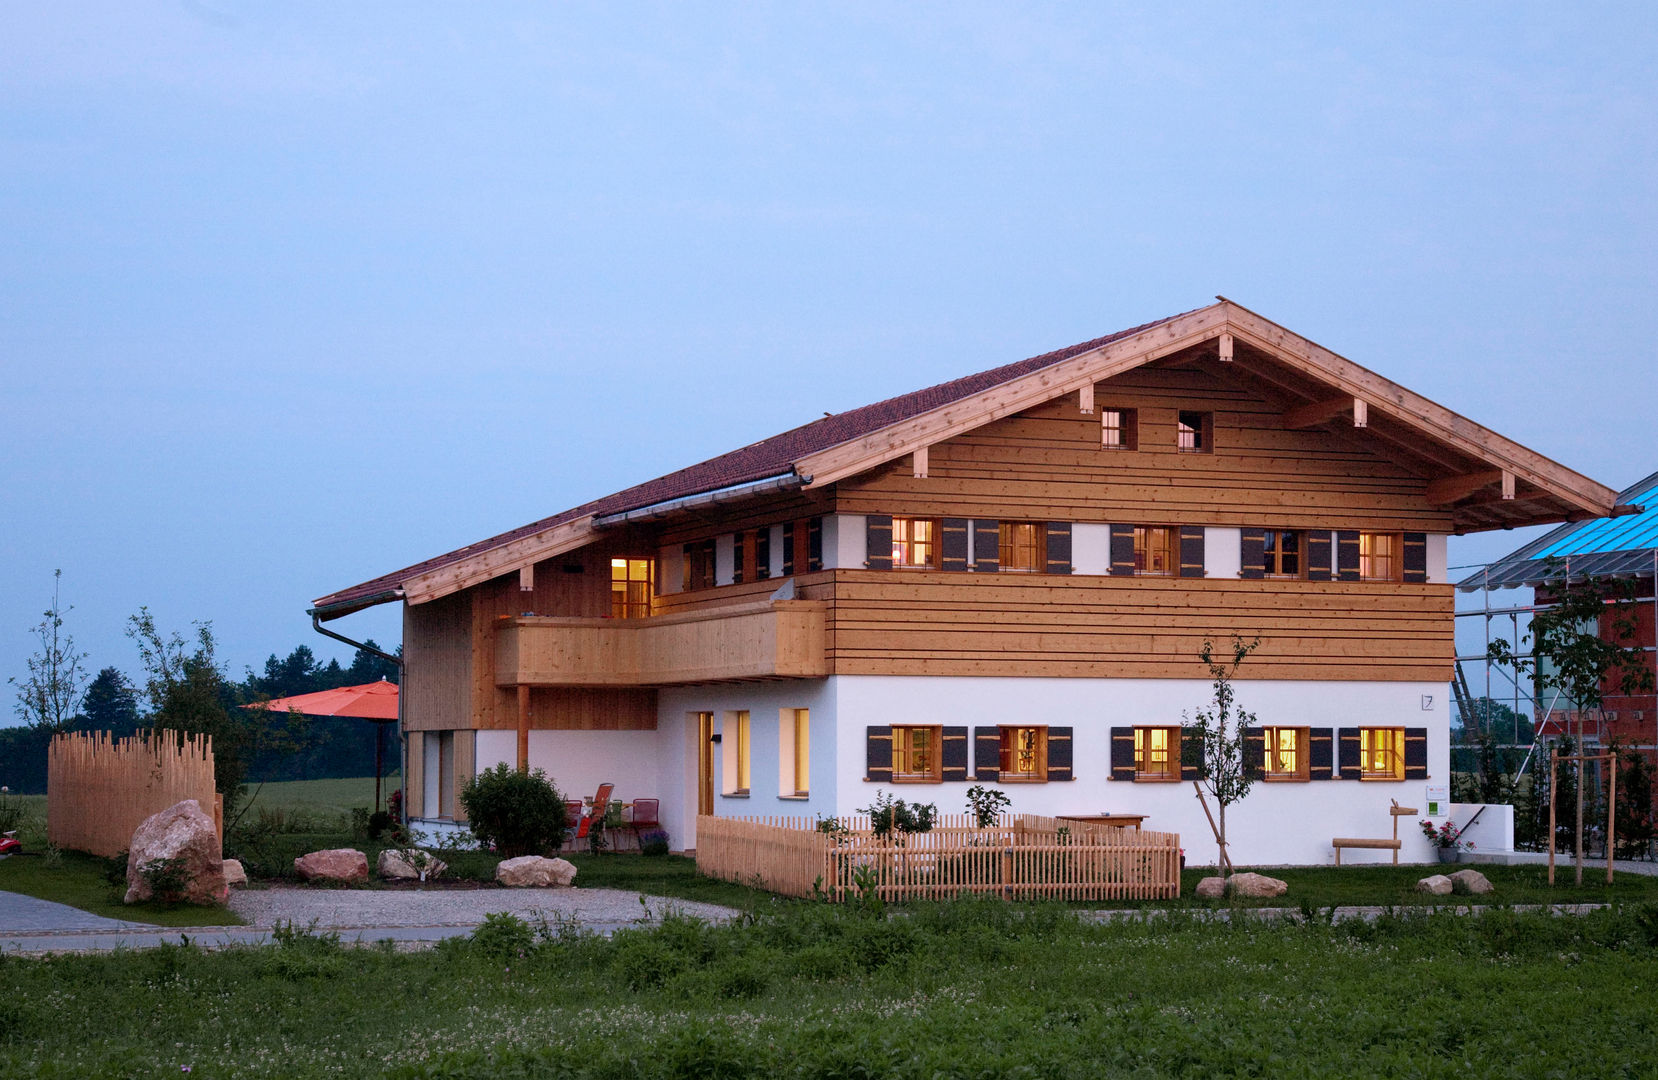 Ein Passivhaus mit Tradition, w. raum Architektur + Innenarchitektur w. raum Architektur + Innenarchitektur Country style houses